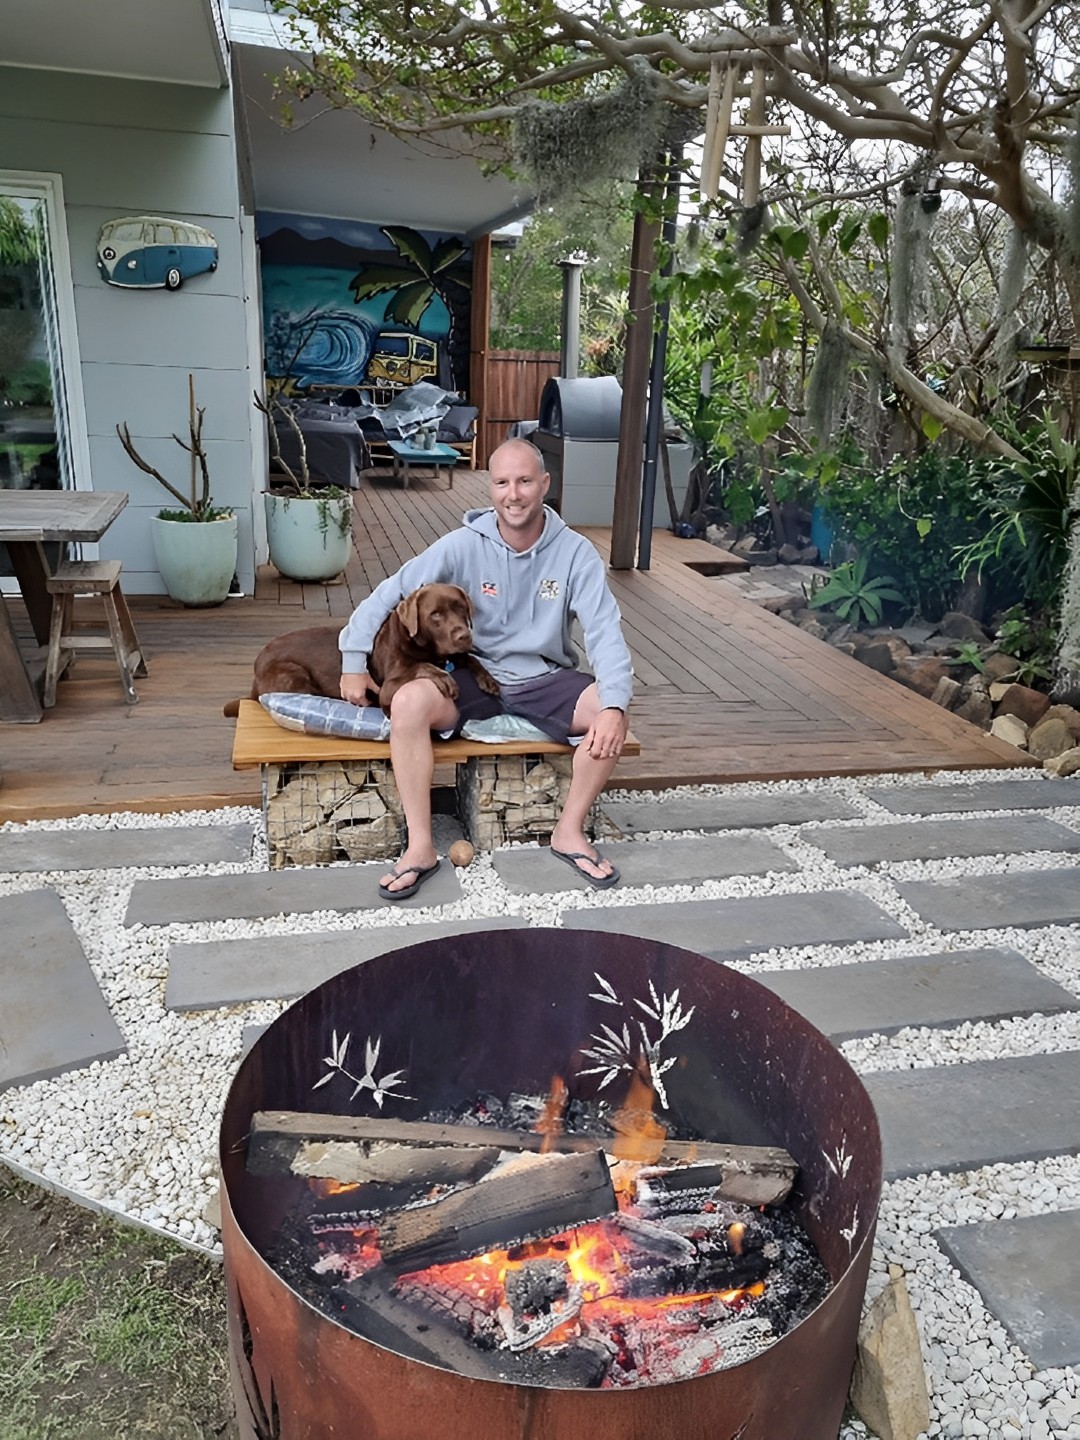 Simpson Strong-Tie Nathan Zalewski at home enjoying his completed DIY deck build